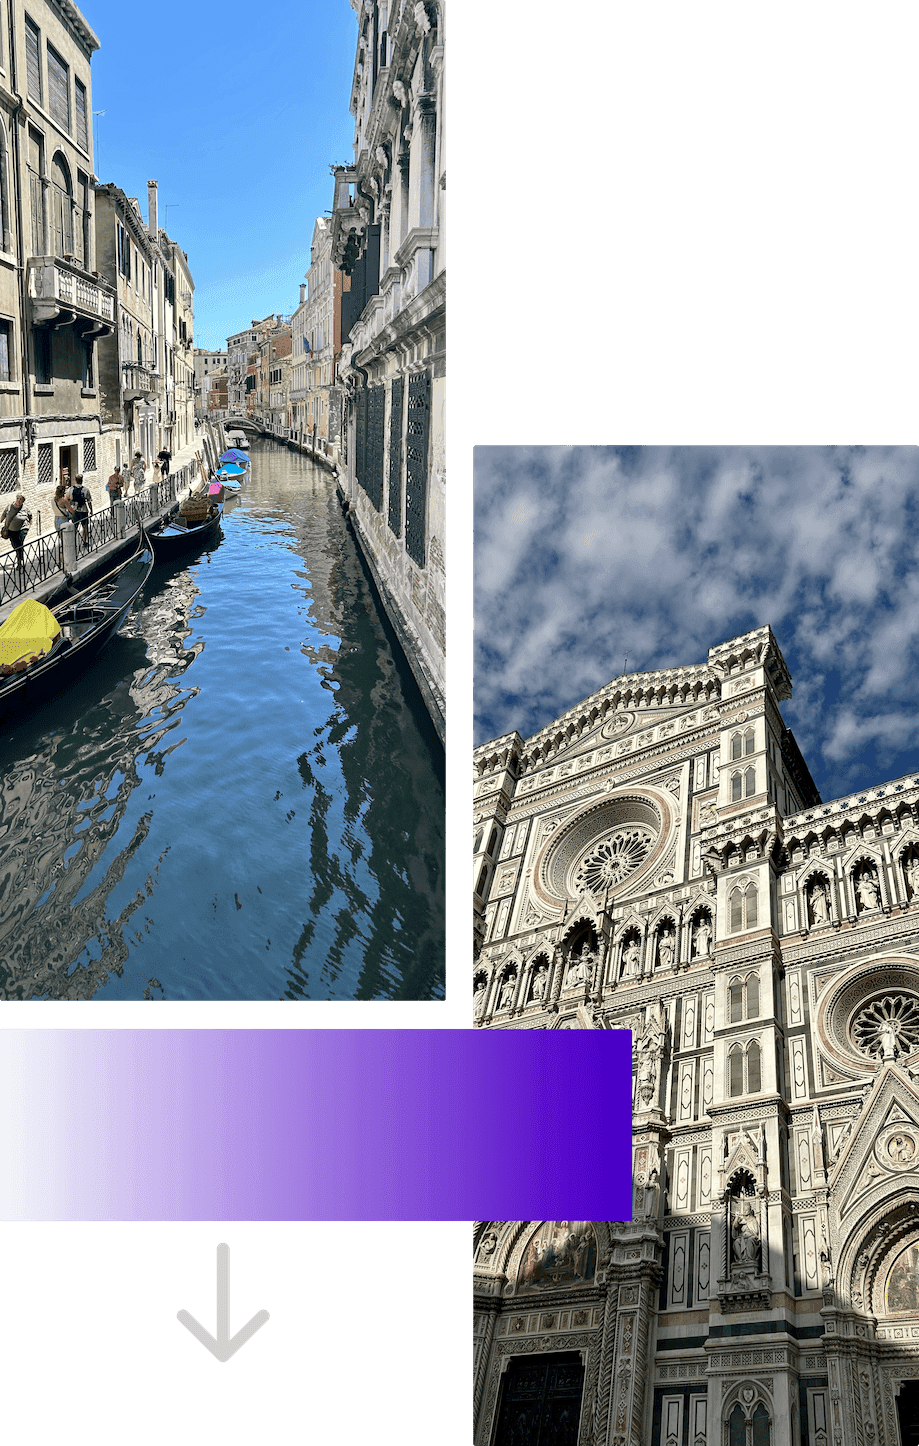 Collage of the Florence duomo cathedral and a venice canal